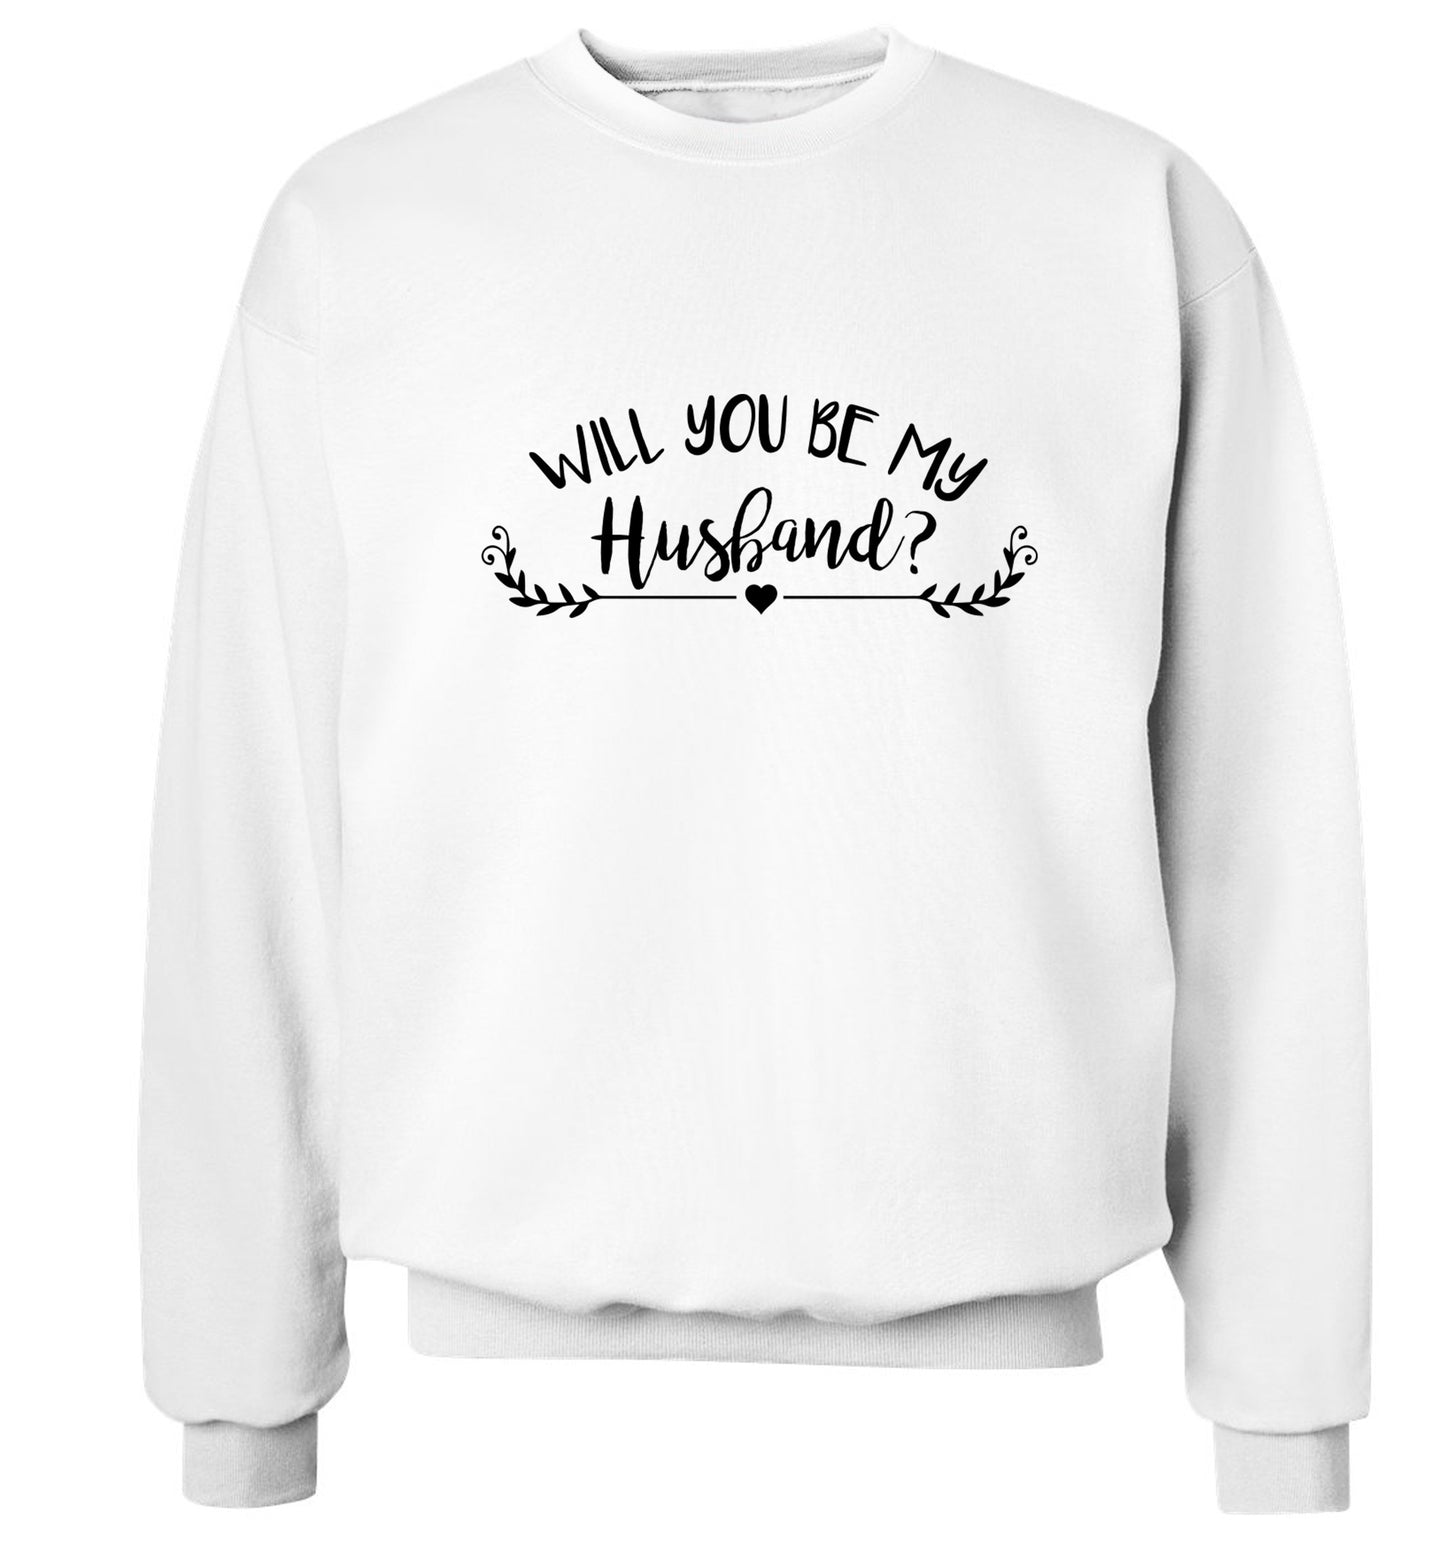 Will you be my husband? Adult's unisex white Sweater 2XL